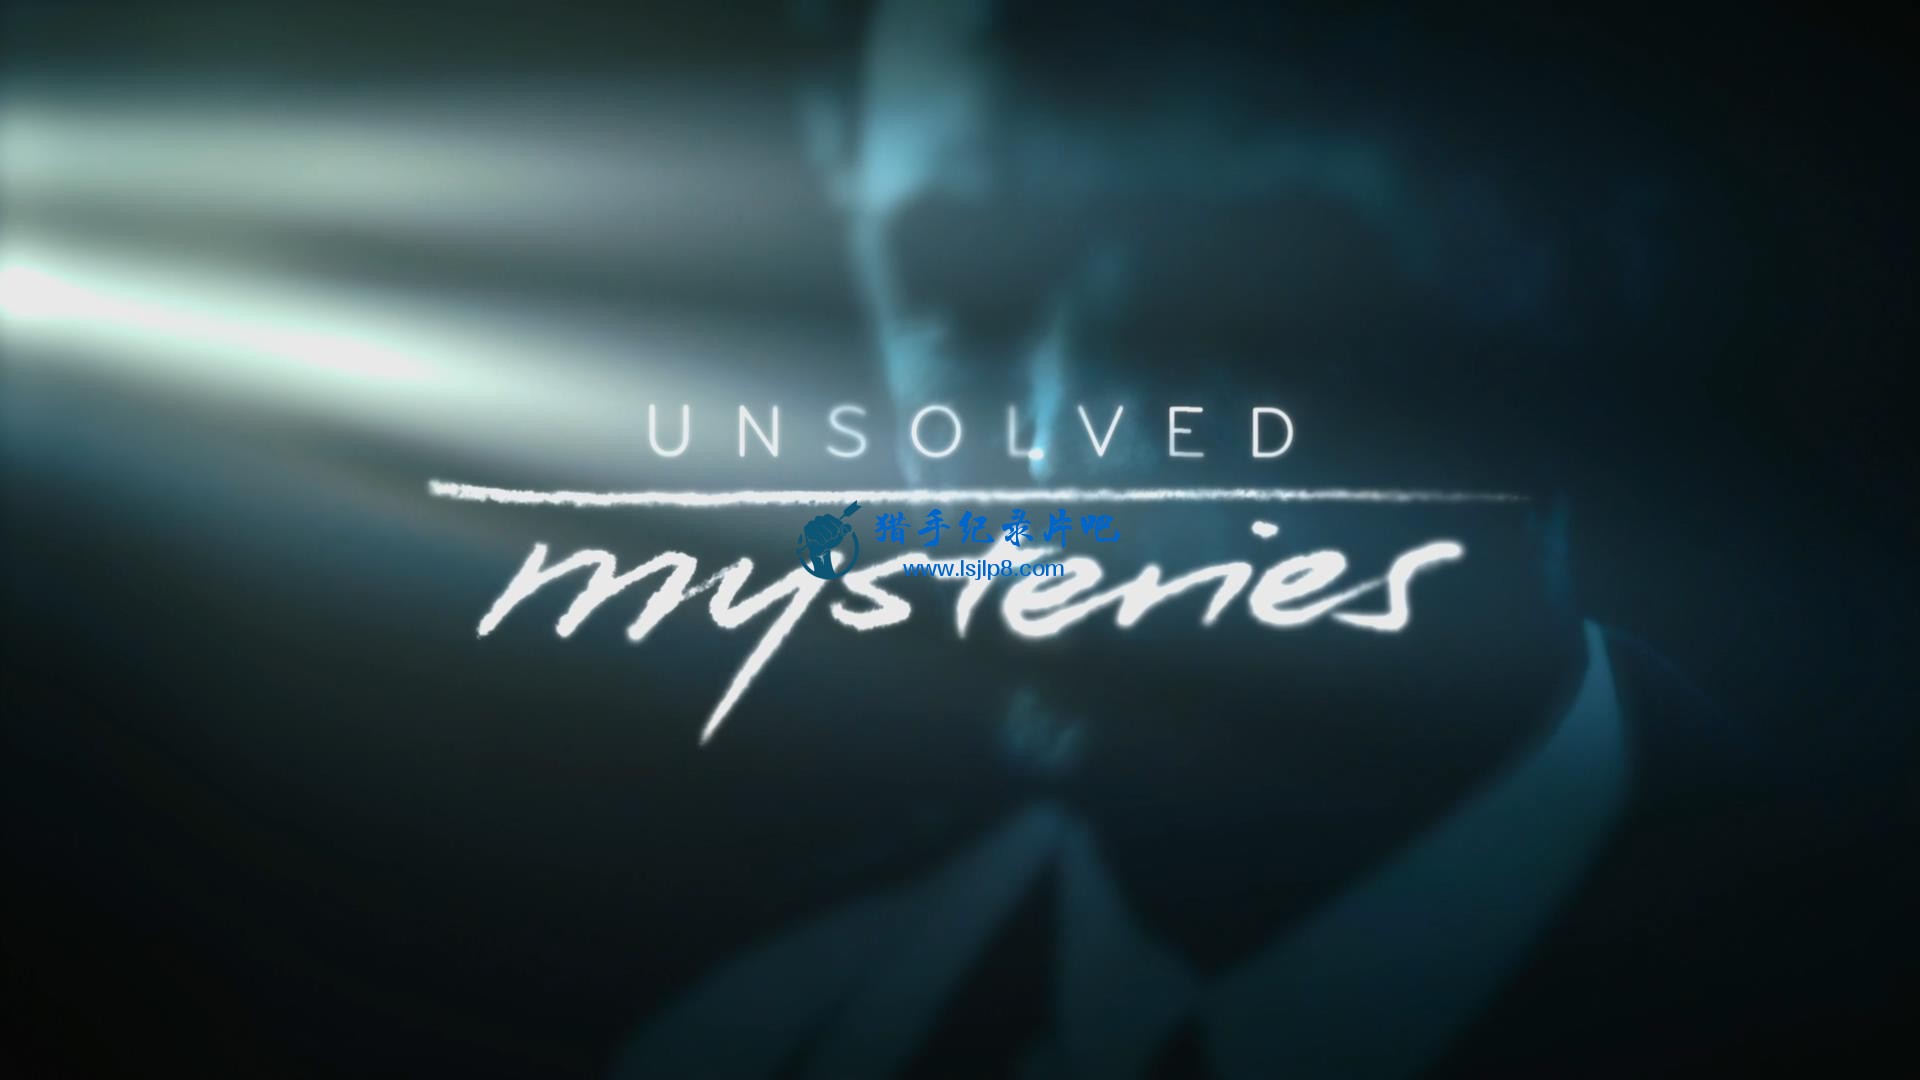 Unsolved.Mysteries.2020.S01E01.Mystery.on.the.Rooftop.1080p.NF.WEB-DL.DDP5.1.x26.jpg